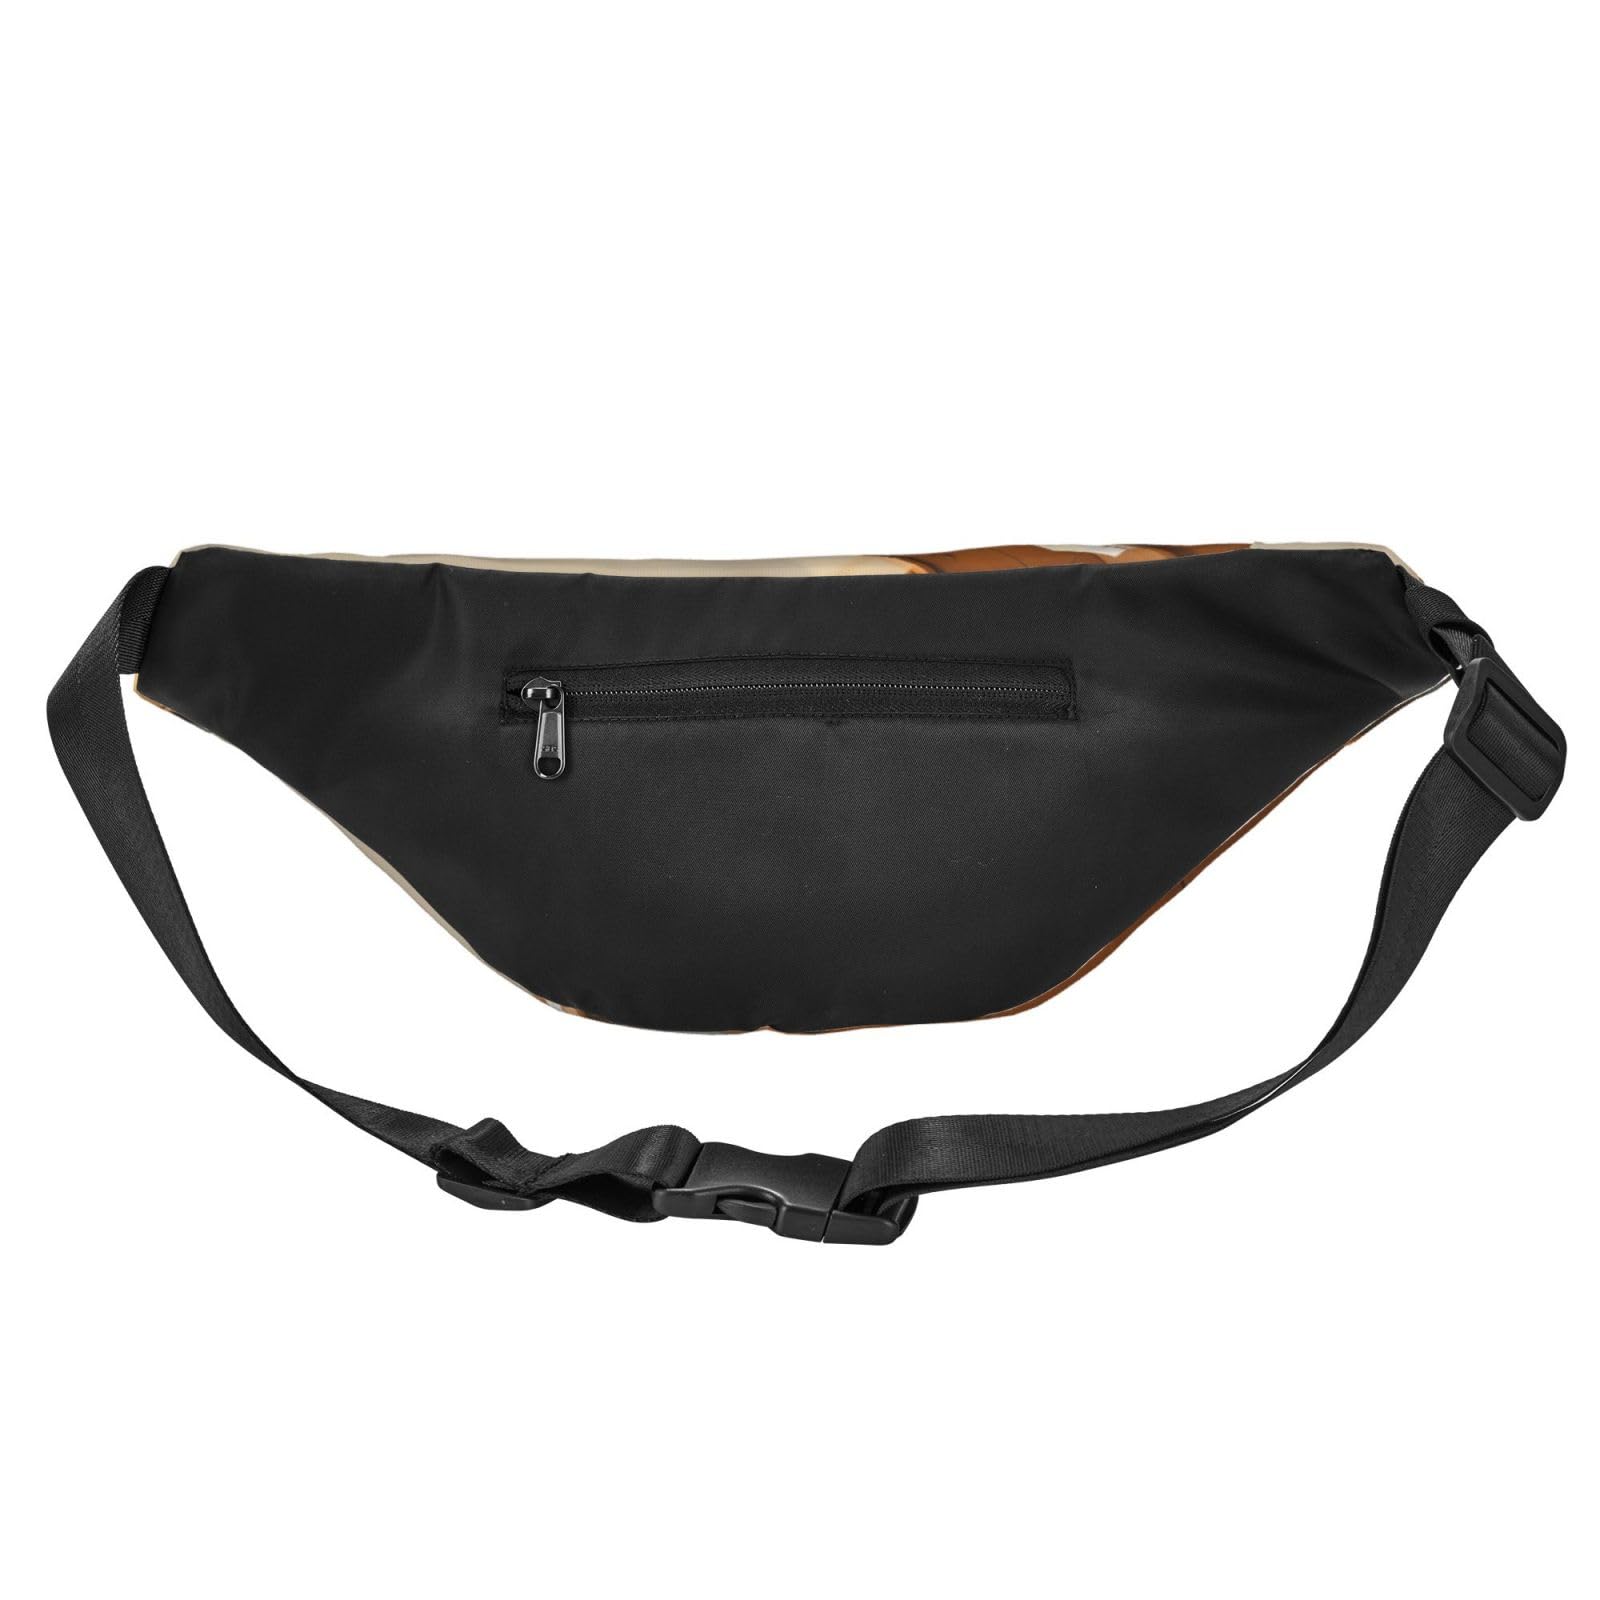 Home Cabinet Print Waist Bag For Women And Men Fashion Large Fanny Pack With Adjustable Strap For Sports Running